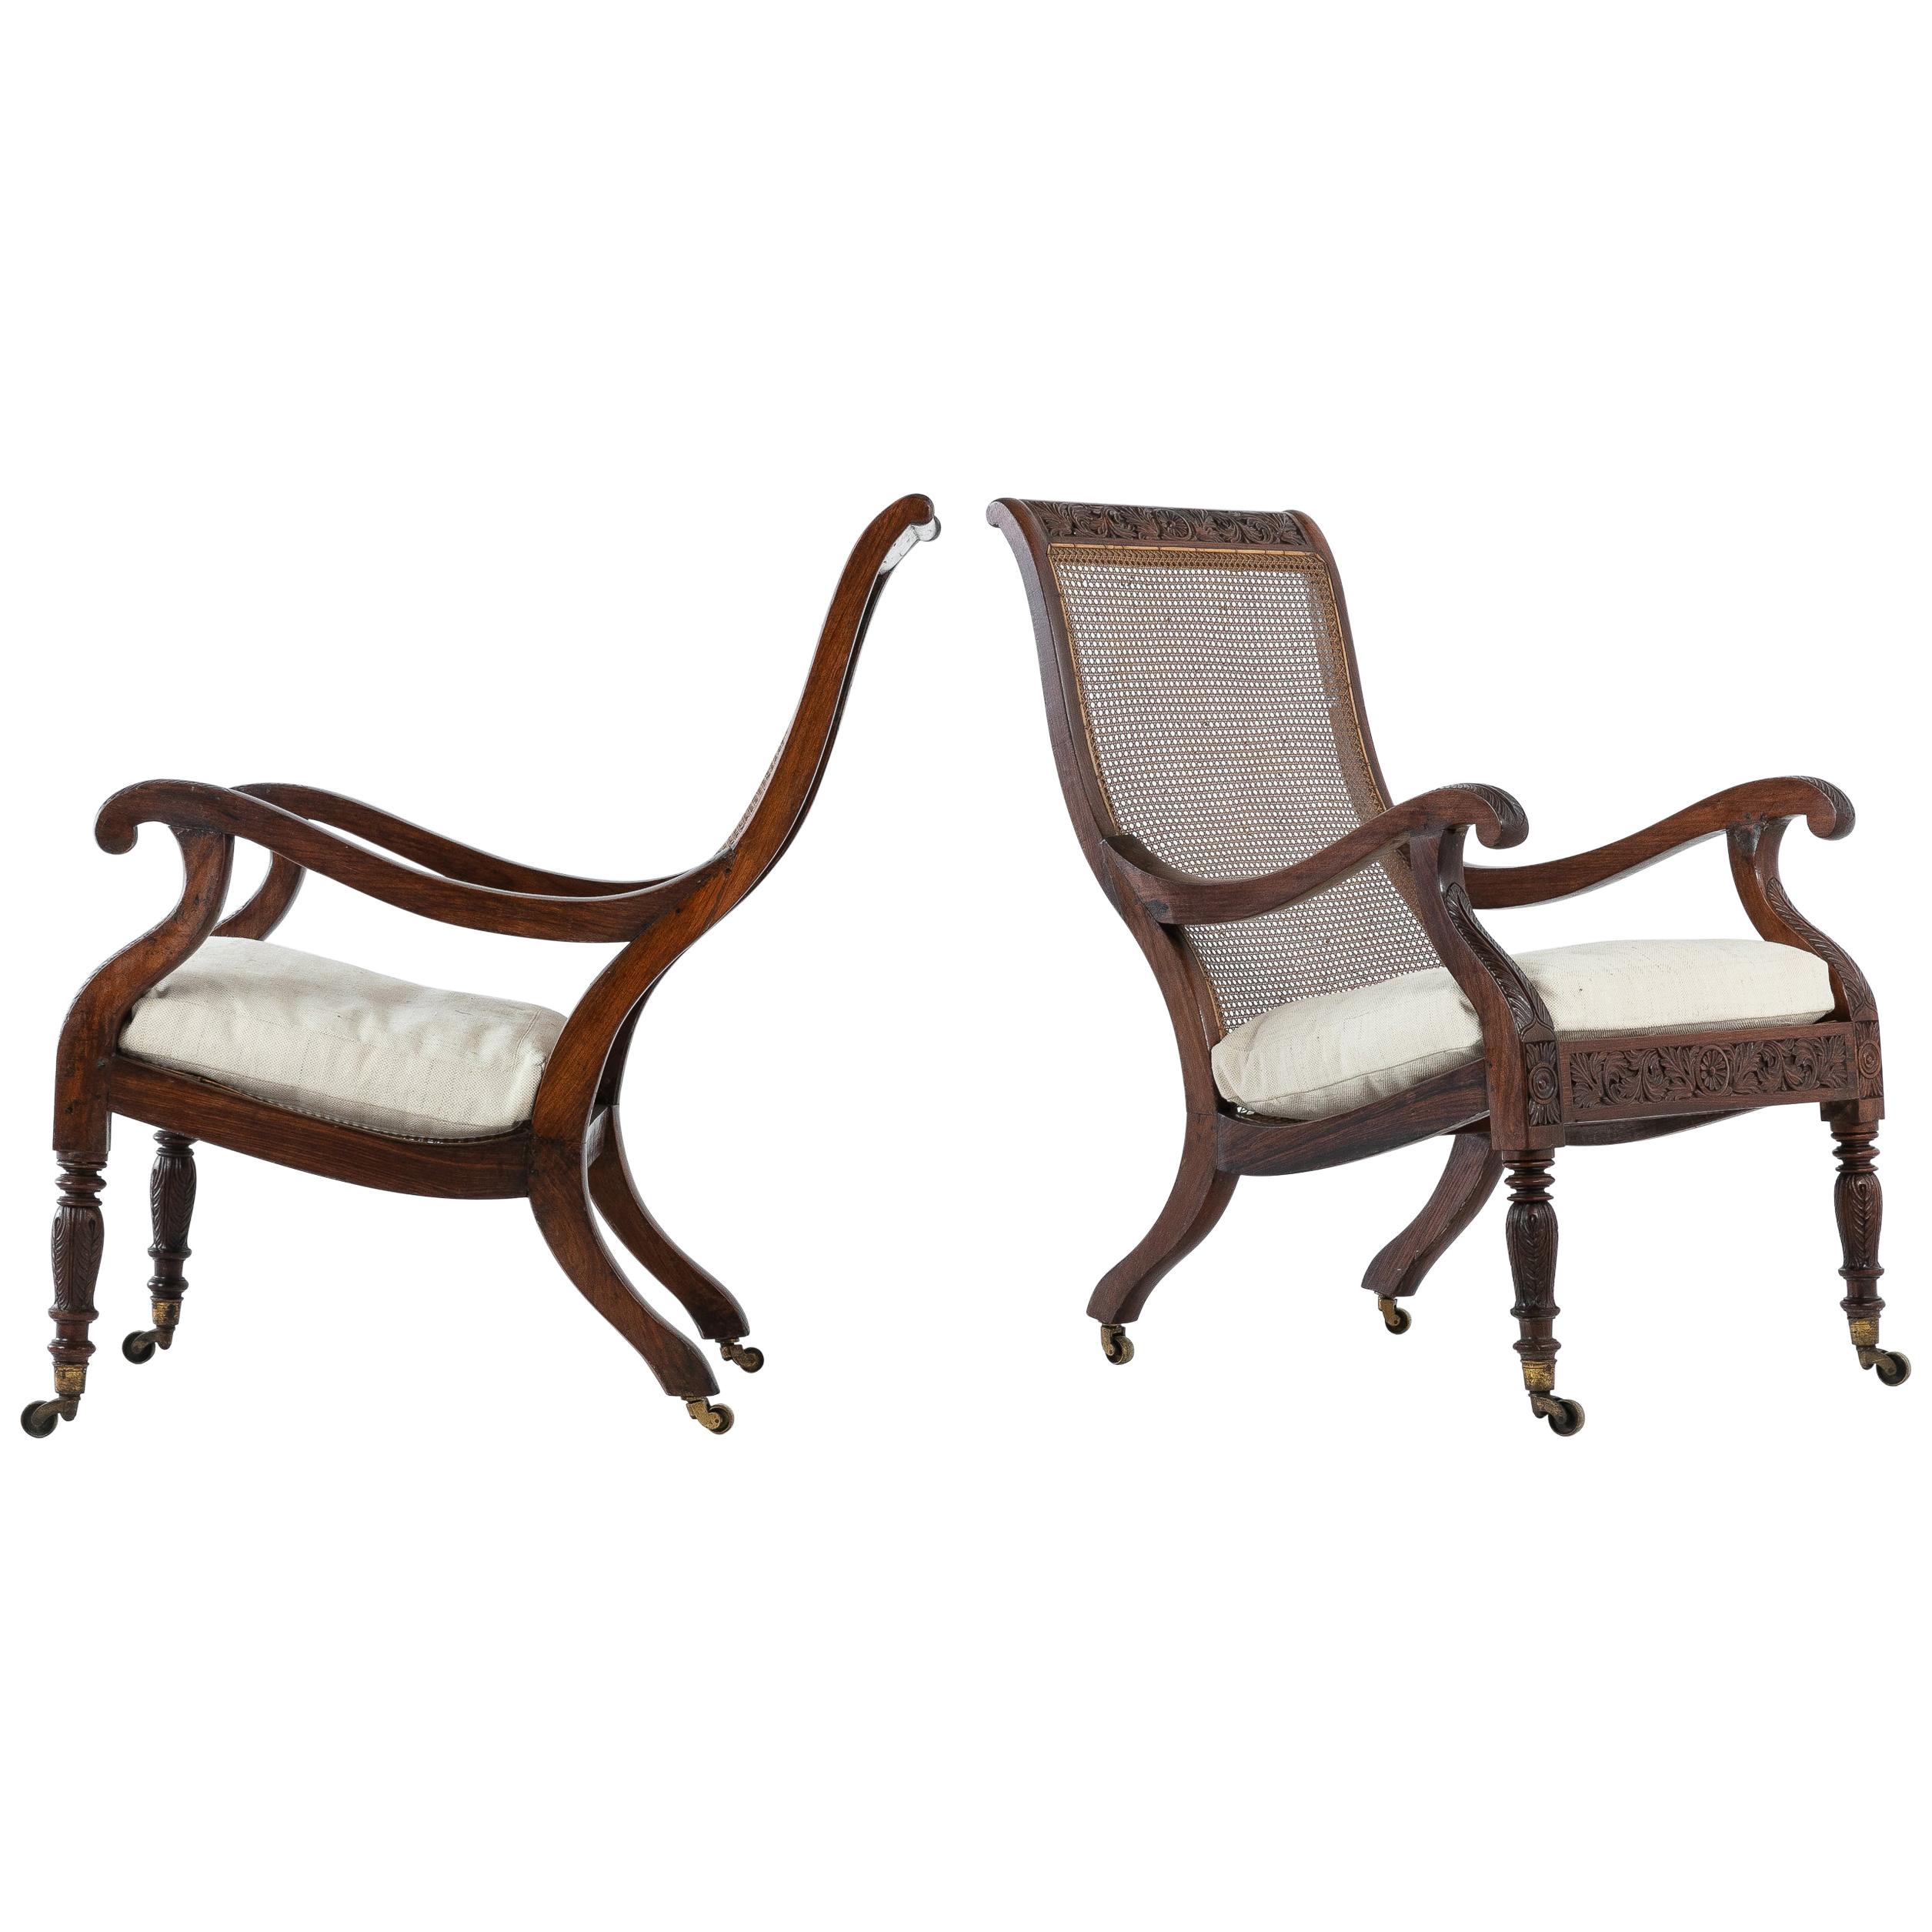 Pair of 19th Century Anglo Indian Plantation Chairs